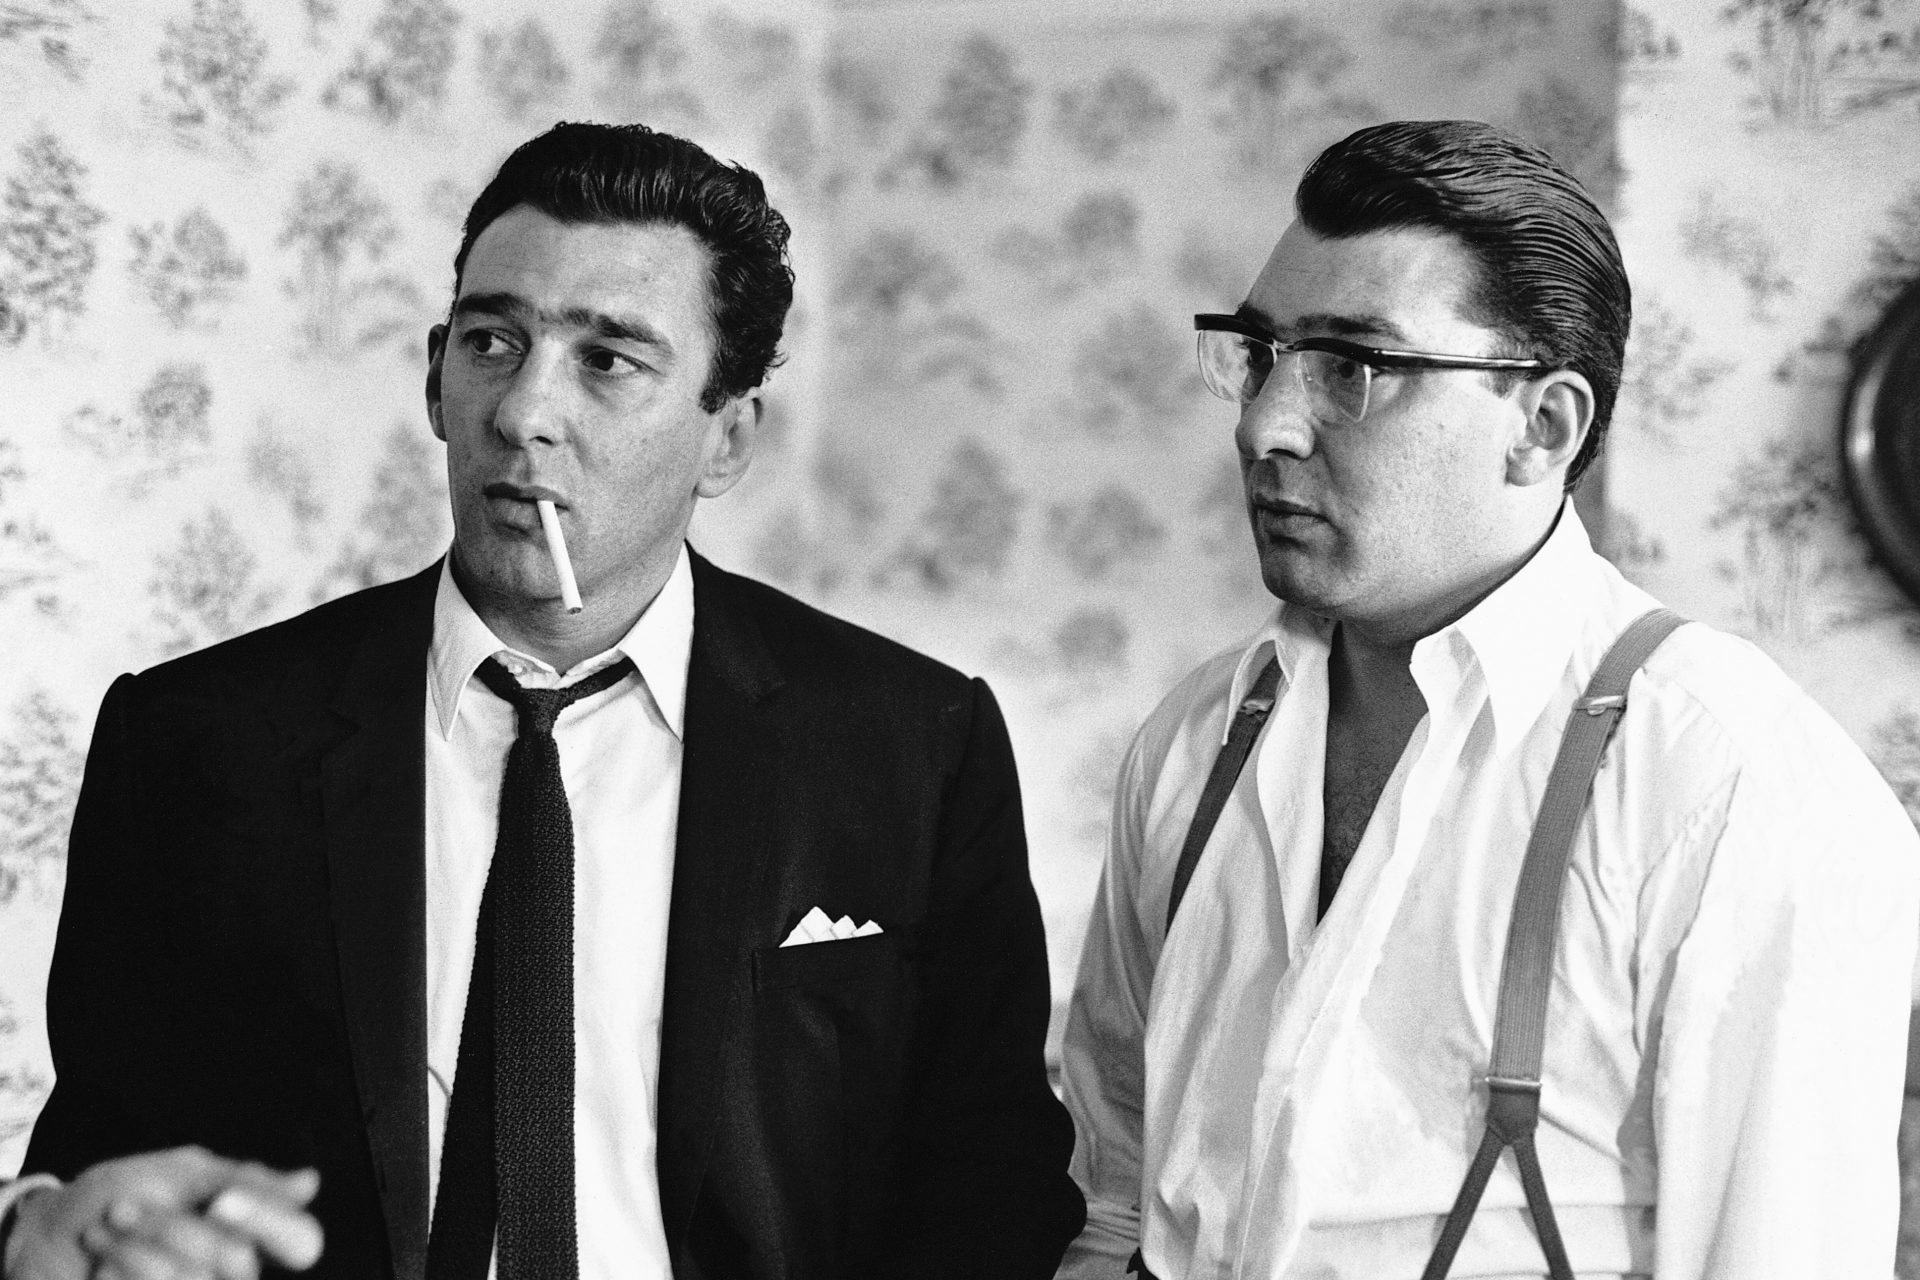 Friends with the Krays